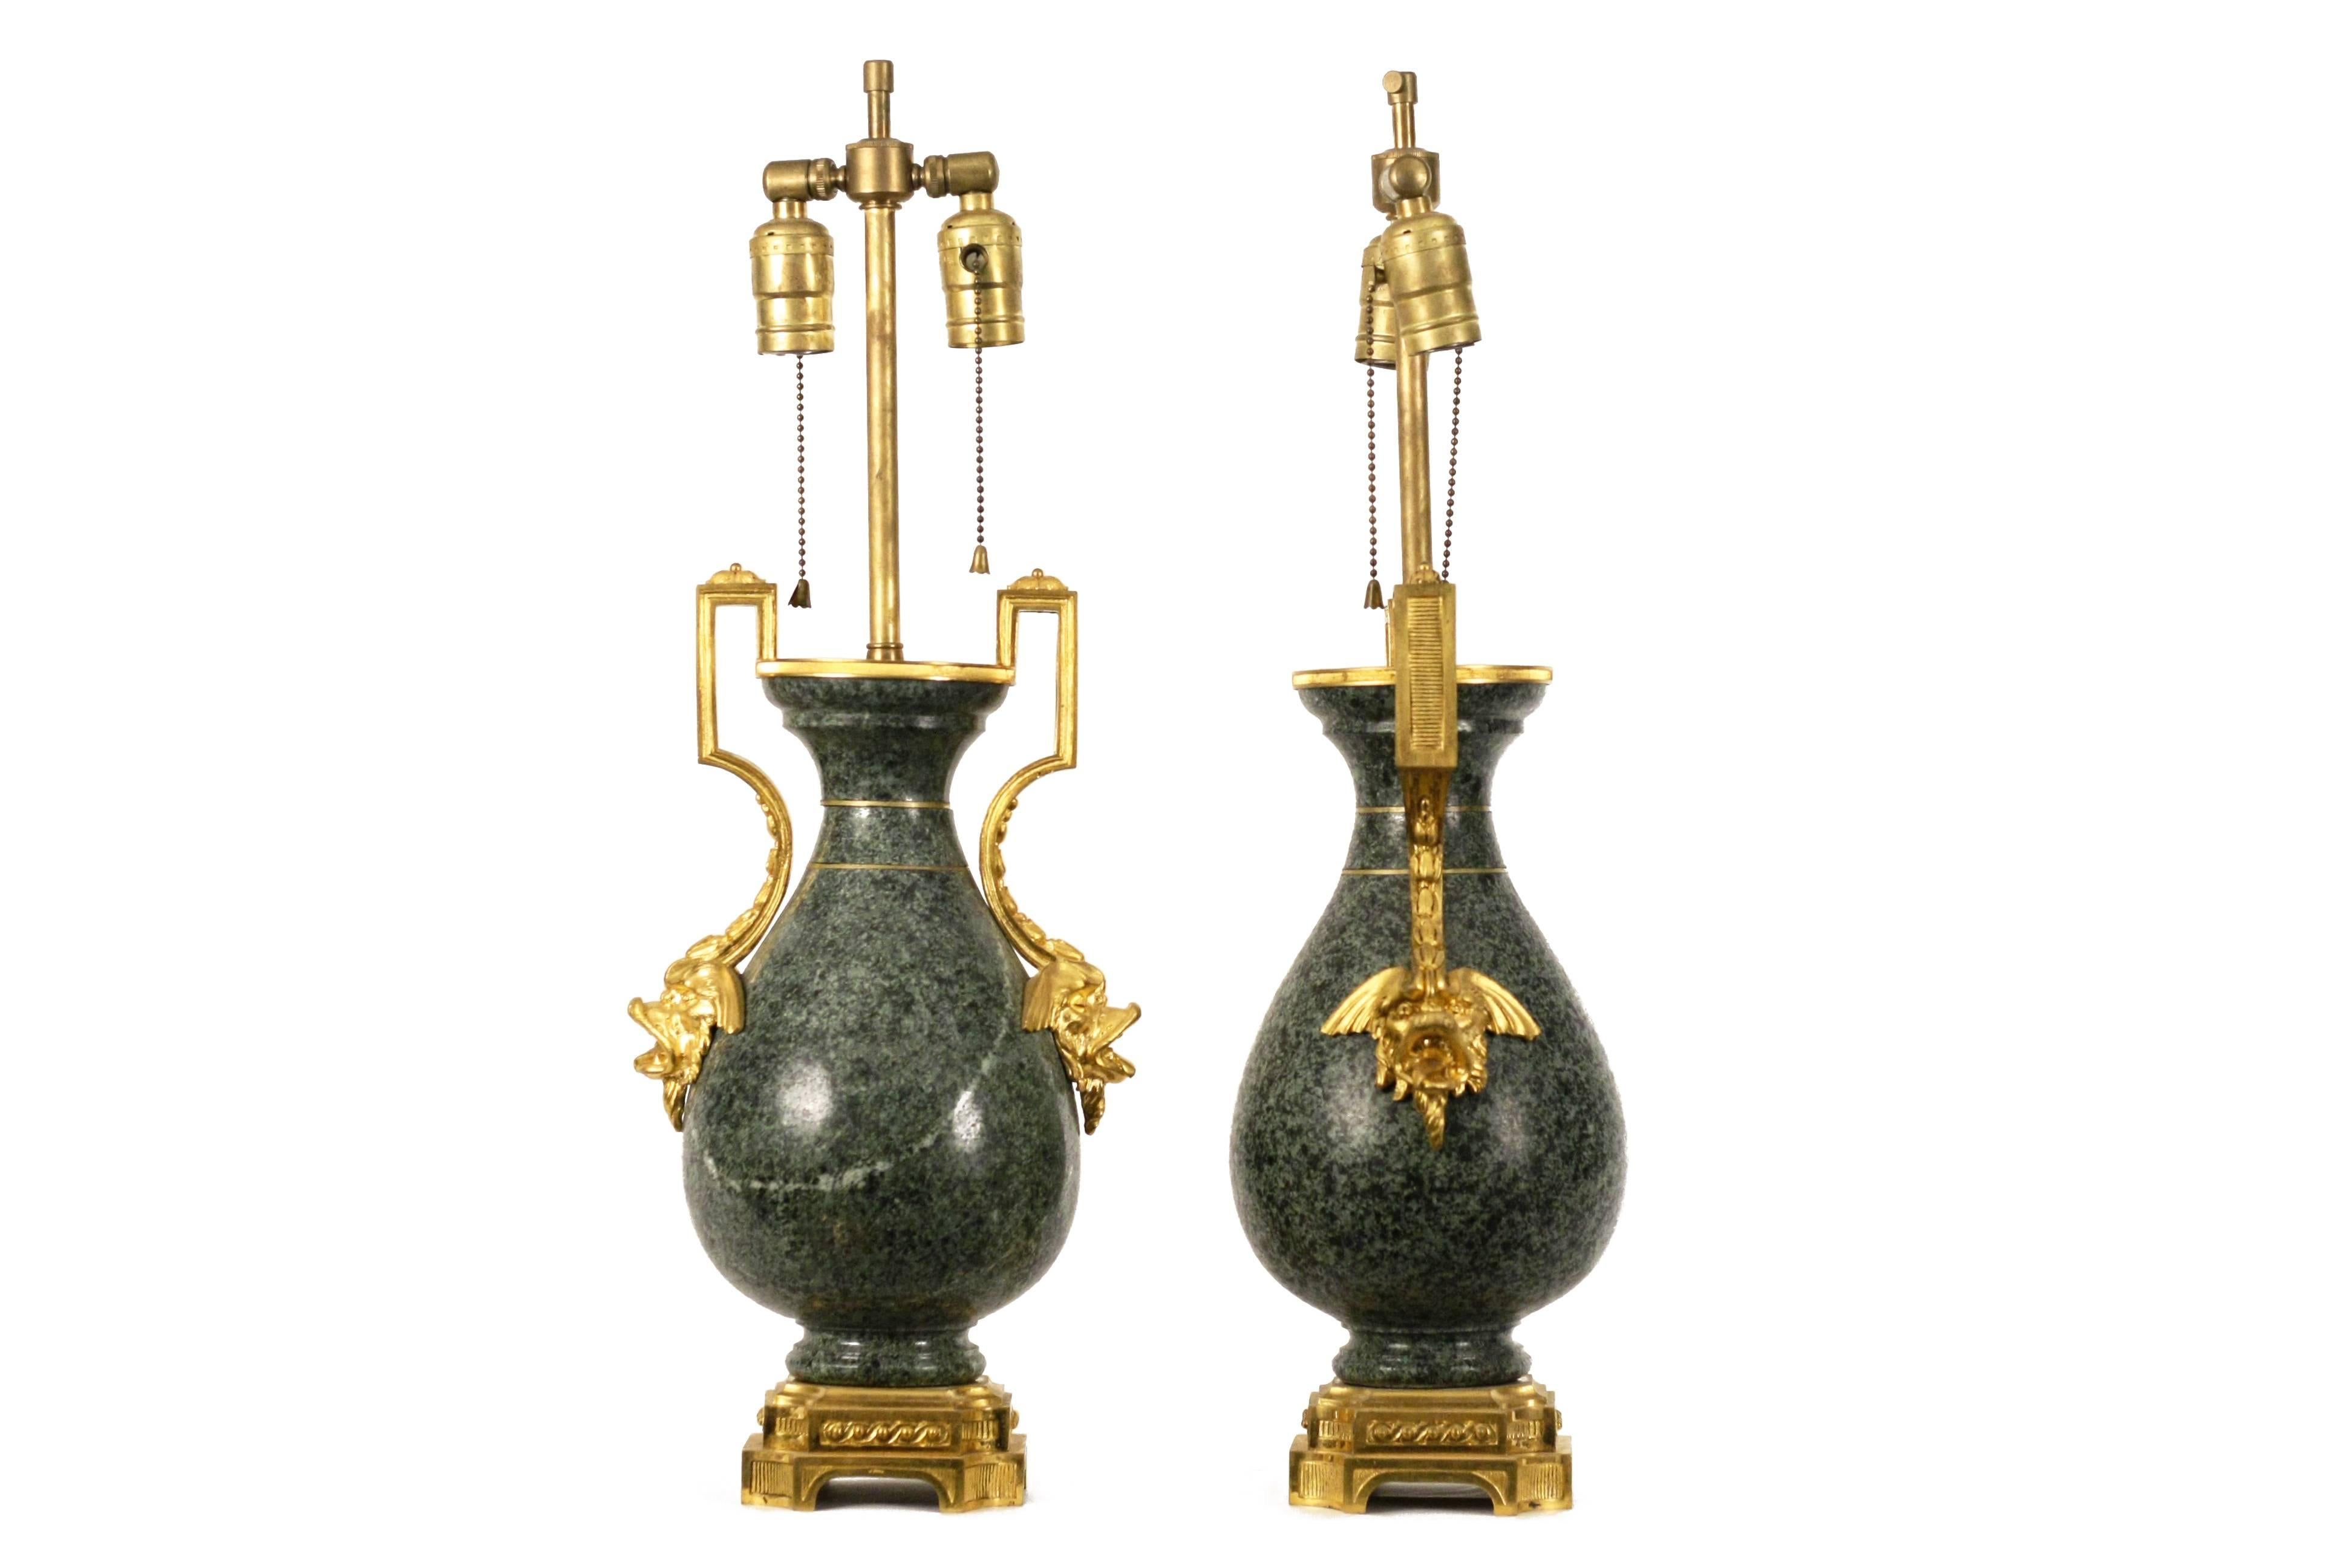 Pair of French vases with ormolu mounts on granite, now mounted as lamps.